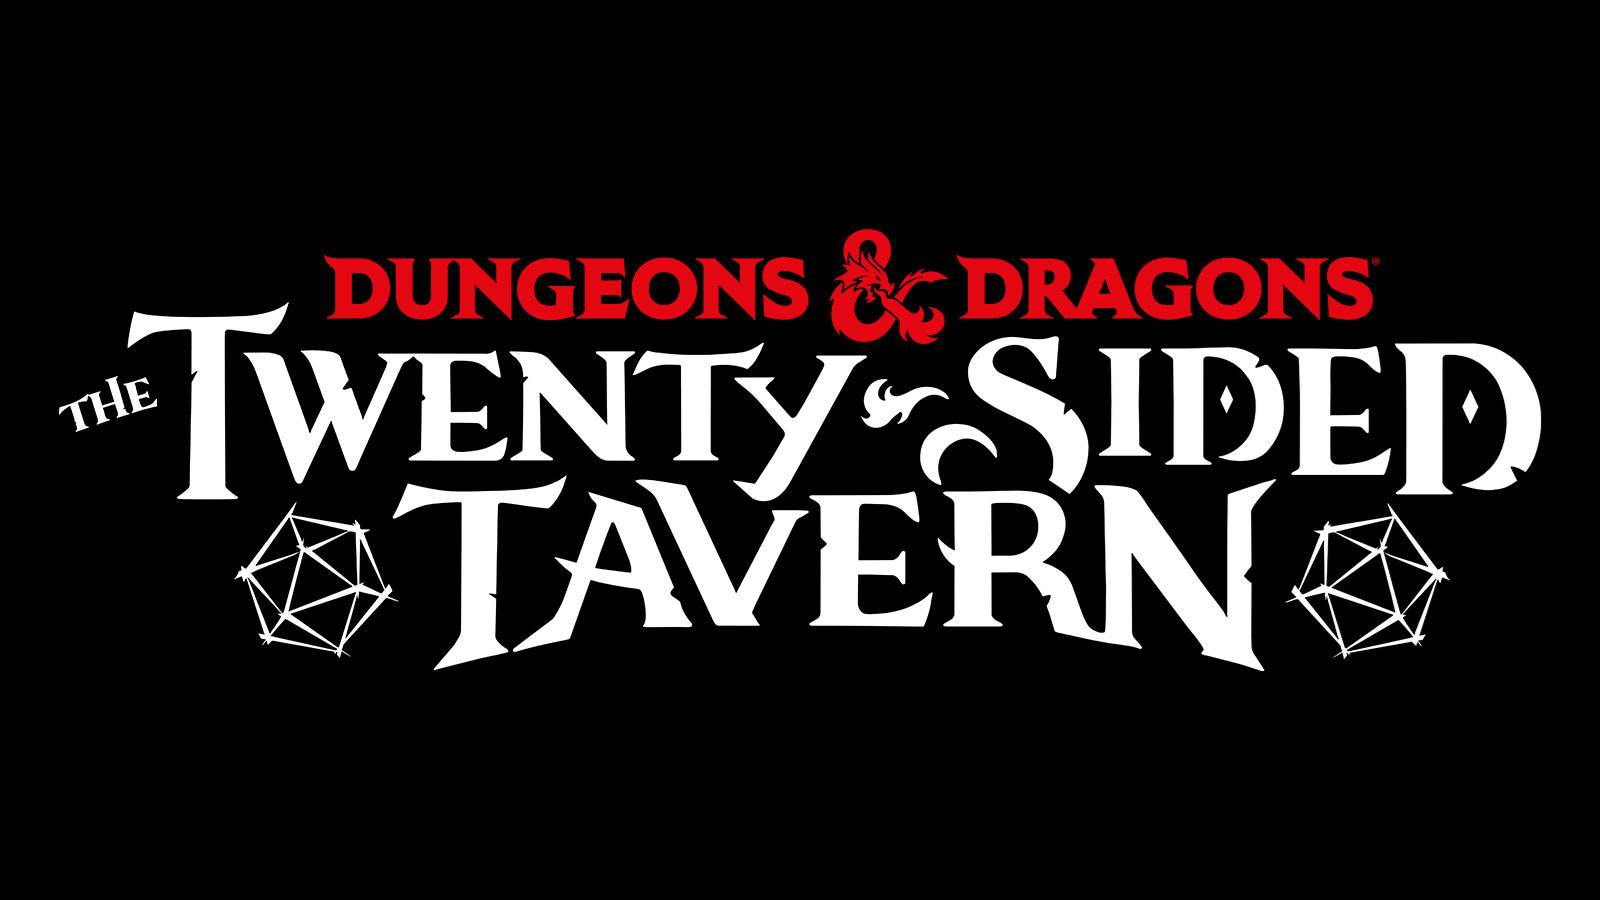 On a black background in white text reads: Dungeons and Dragons The Twenty Sided Tavern